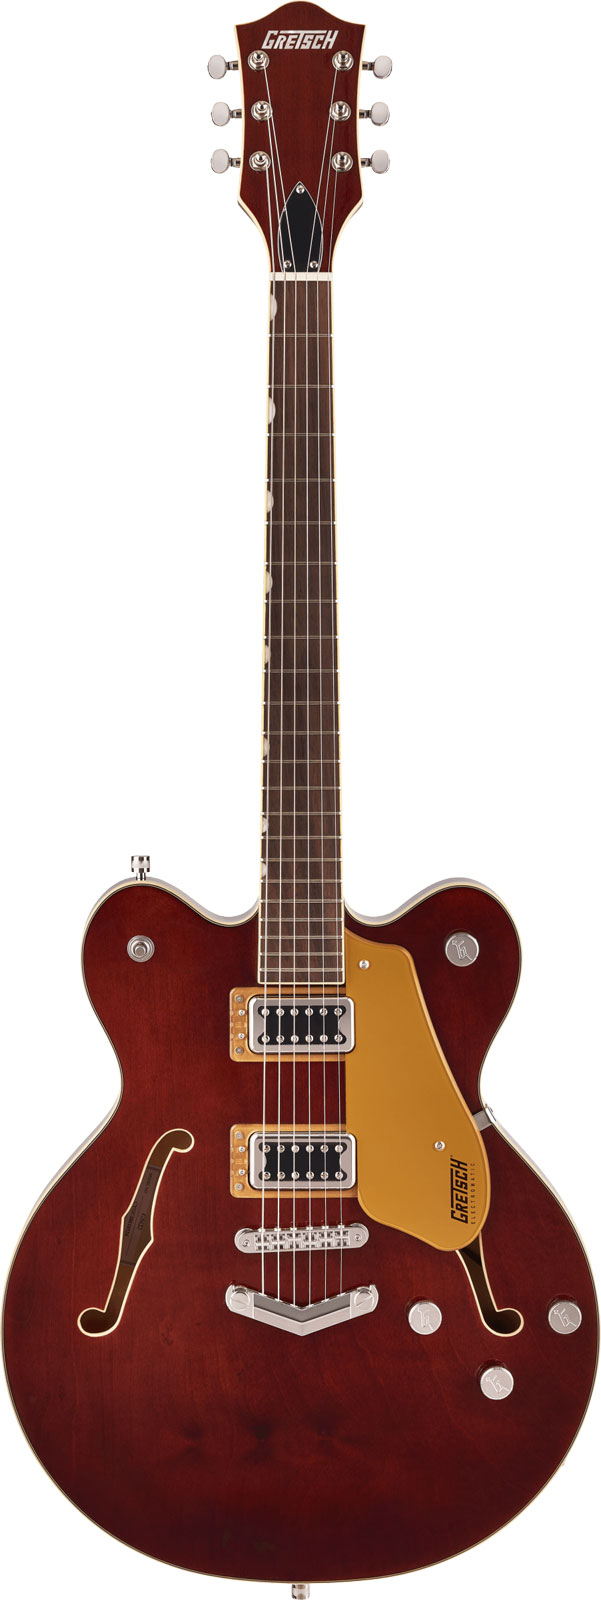 GRETSCH GUITARS G5622 ELECTROMATIC CENTER BLOCK DOUBLE-CUT WITH V-STOPTAIL LRL, AGED WALNUT